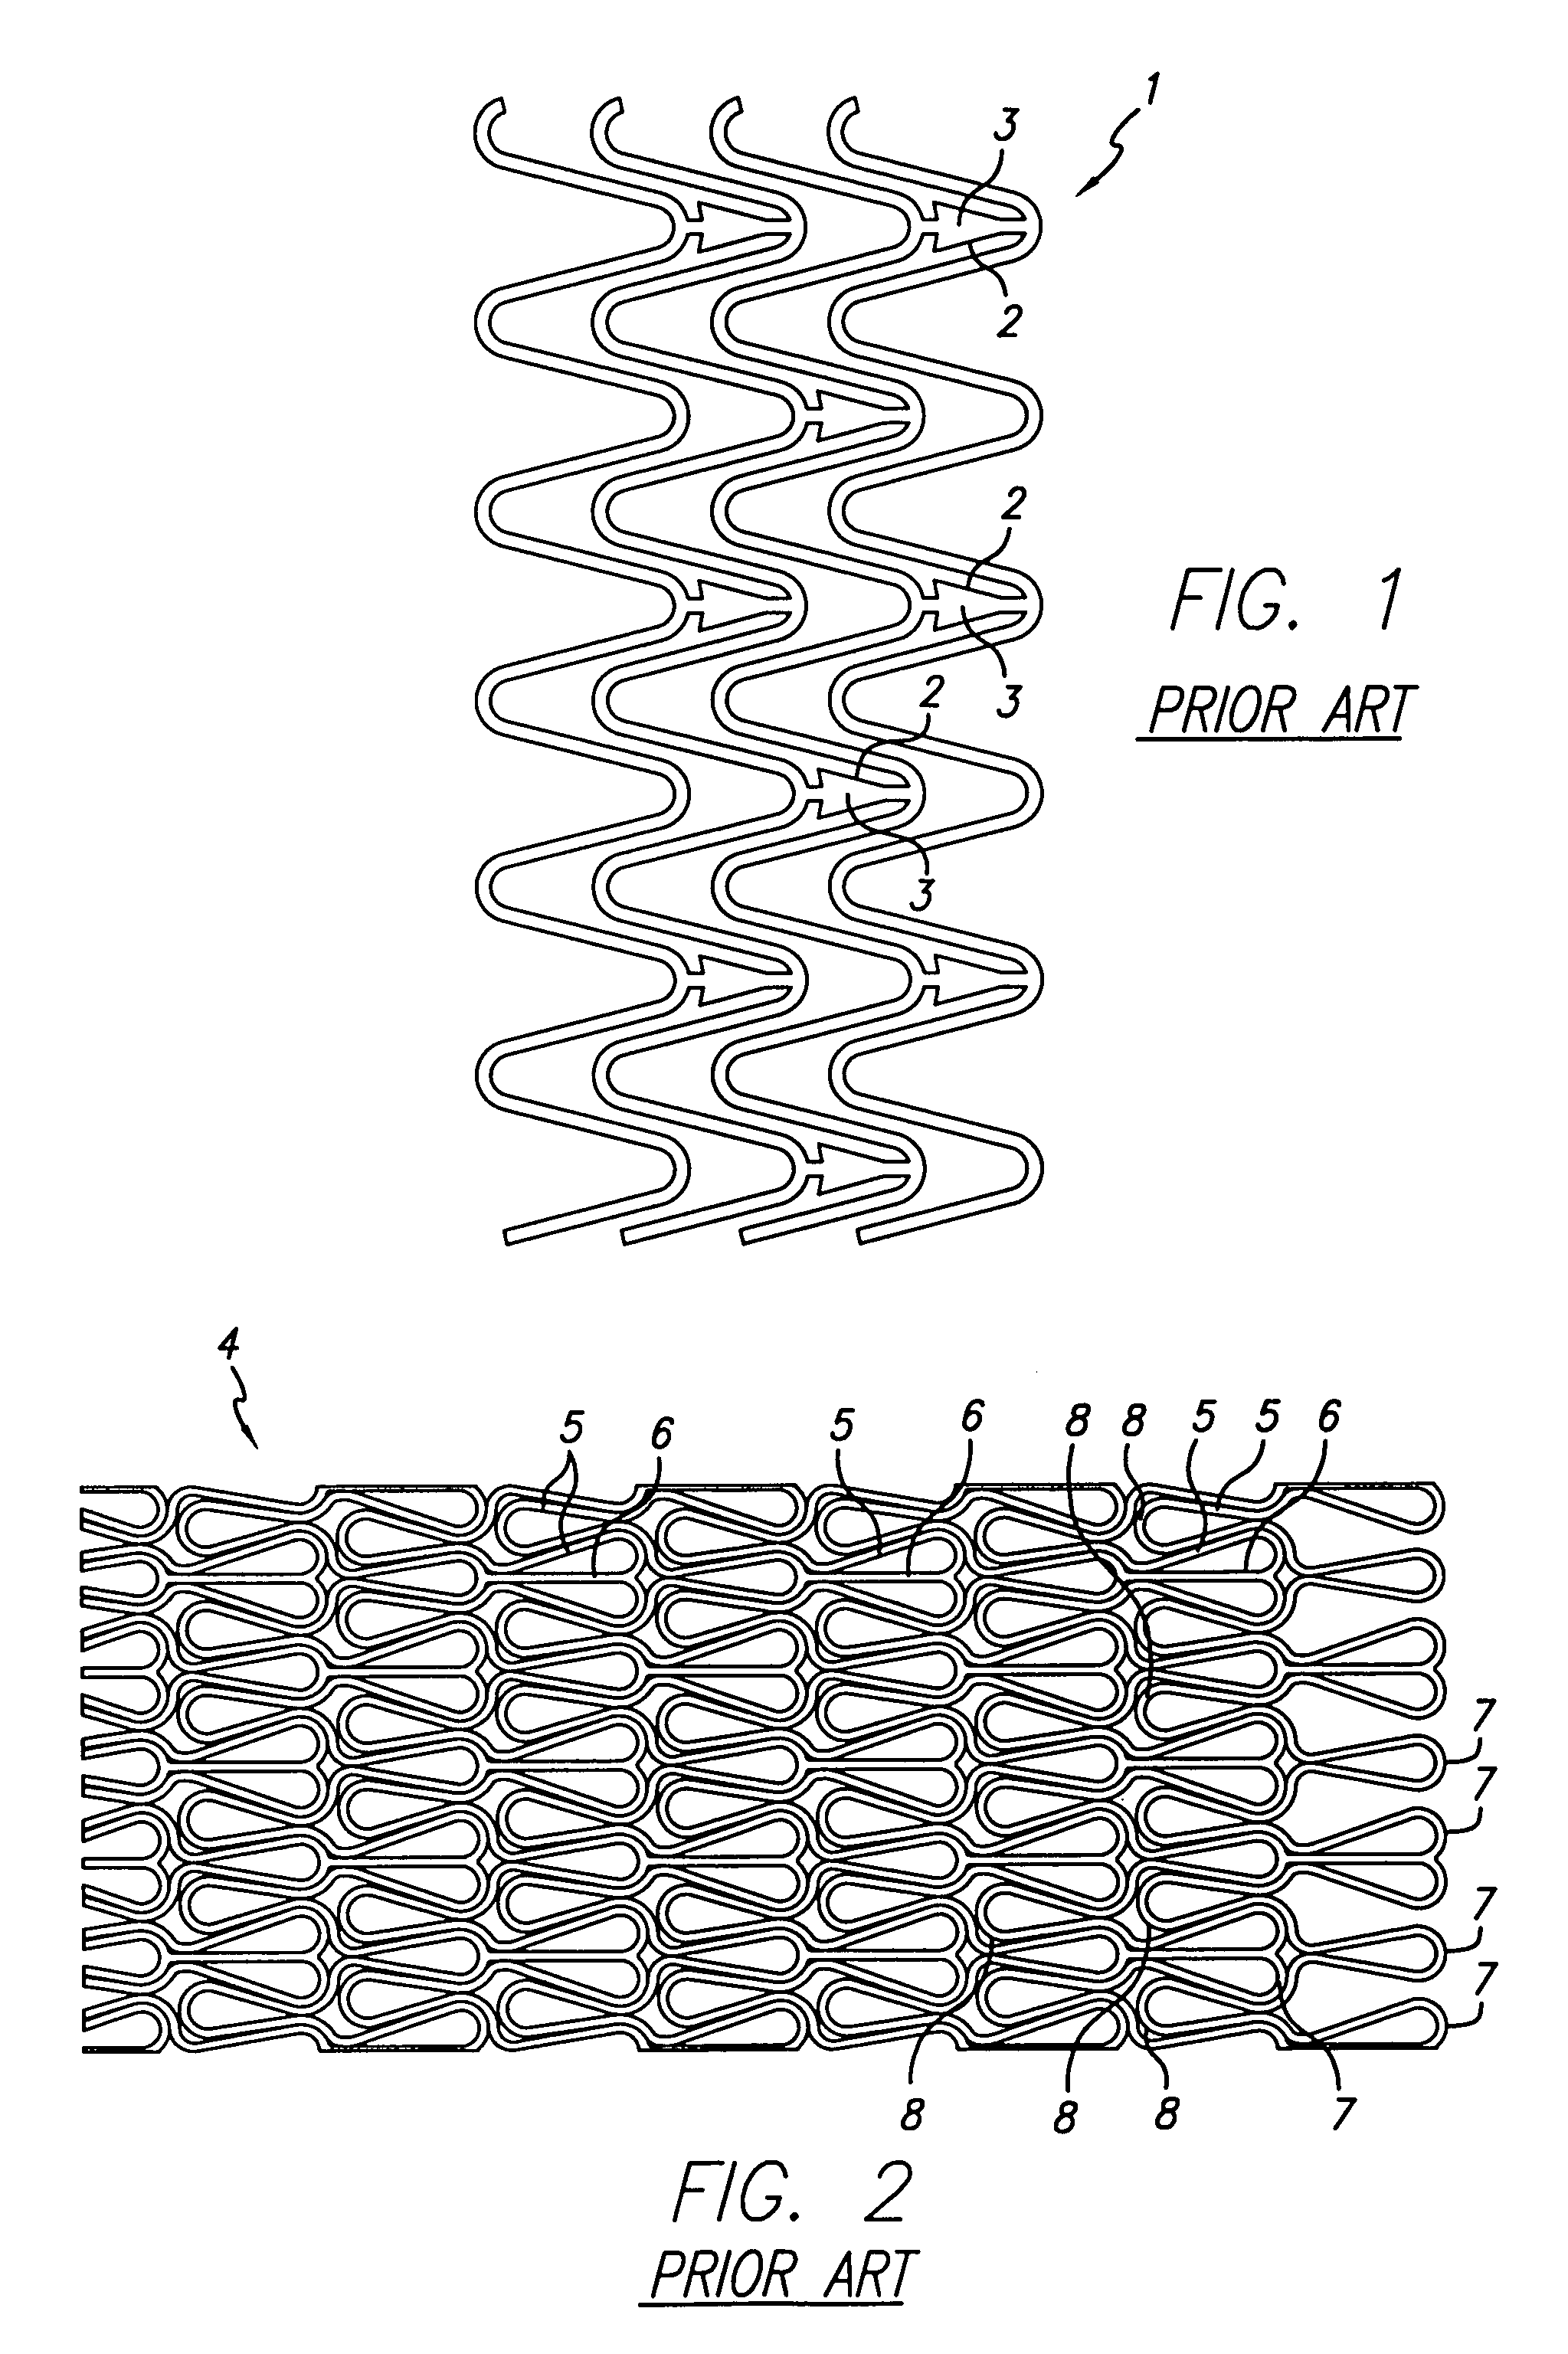 Apparatus and method for decreasing stent gap size